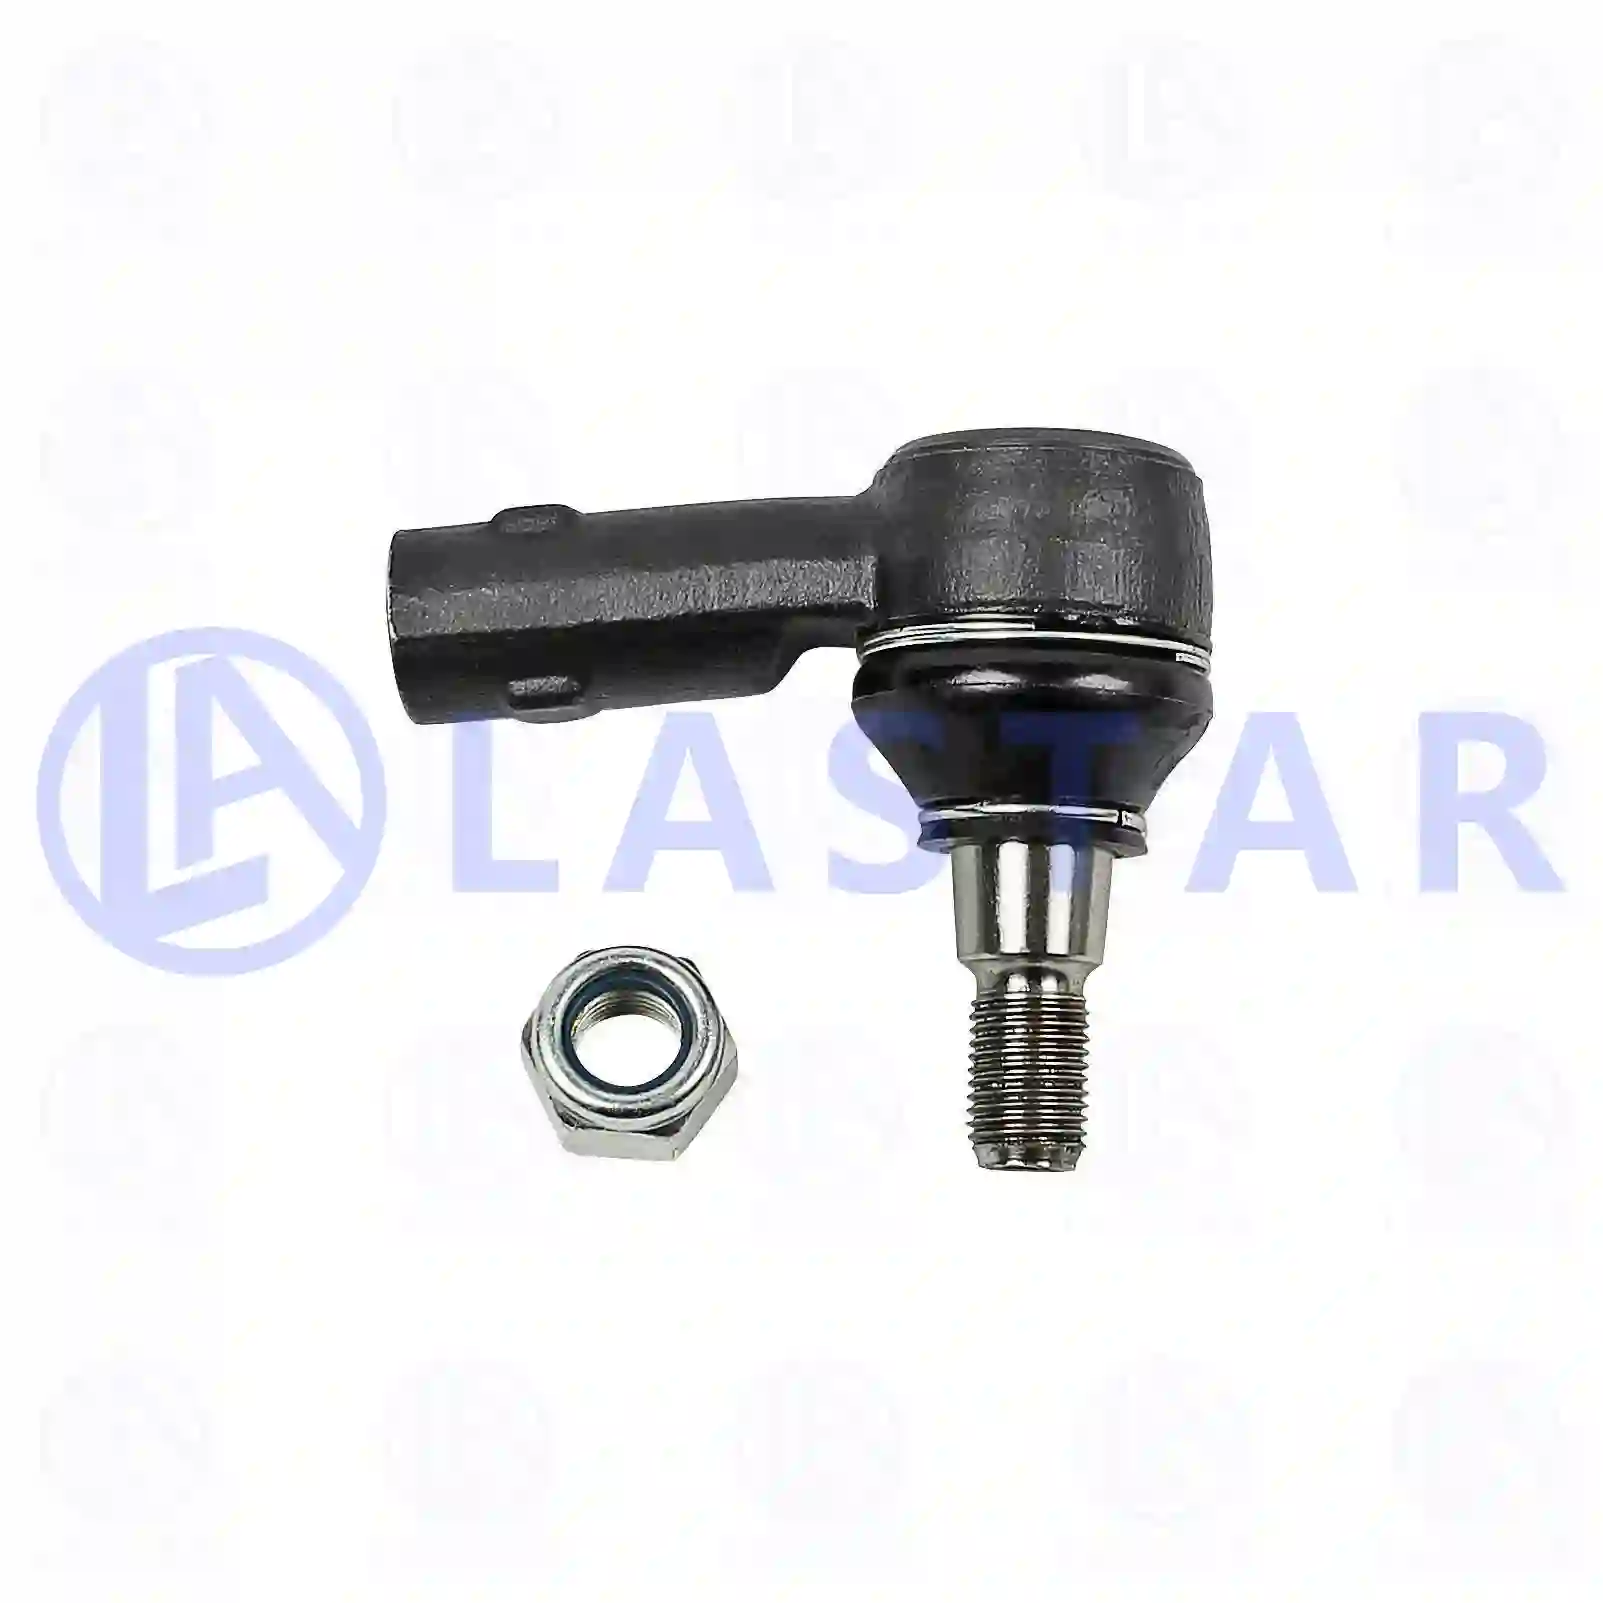 Ball joint, right hand thread, 77705490, 6384600048, , ||  77705490 Lastar Spare Part | Truck Spare Parts, Auotomotive Spare Parts Ball joint, right hand thread, 77705490, 6384600048, , ||  77705490 Lastar Spare Part | Truck Spare Parts, Auotomotive Spare Parts